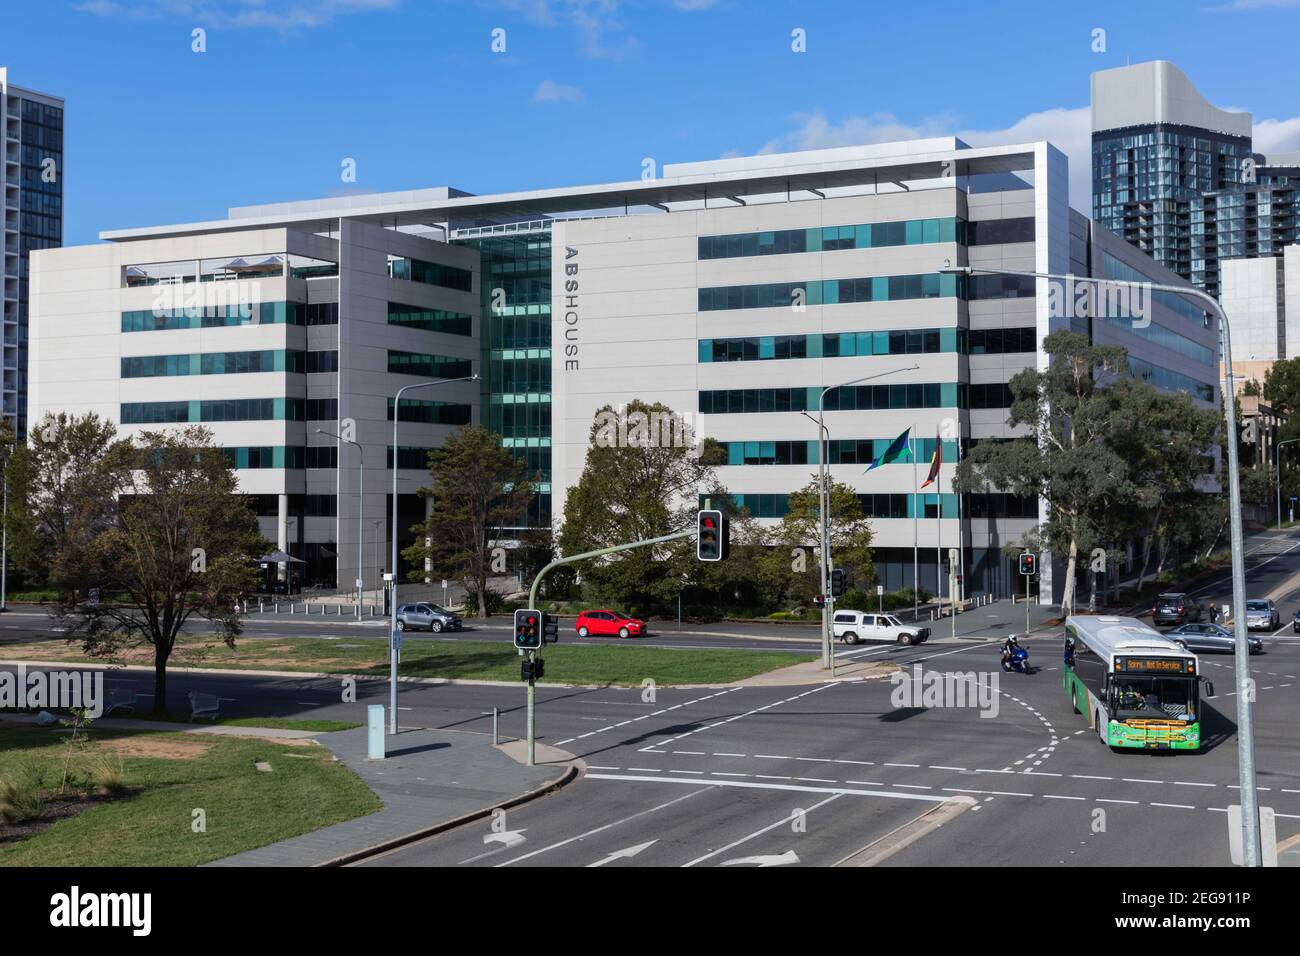 Canberra. 18th 2021. Photo taken on Feb. 2021 shows the Australian Bureau of Statistics (ABS) building in Canberra, Australia. Australia's unemployment rate has fallen for the third consecutive month as